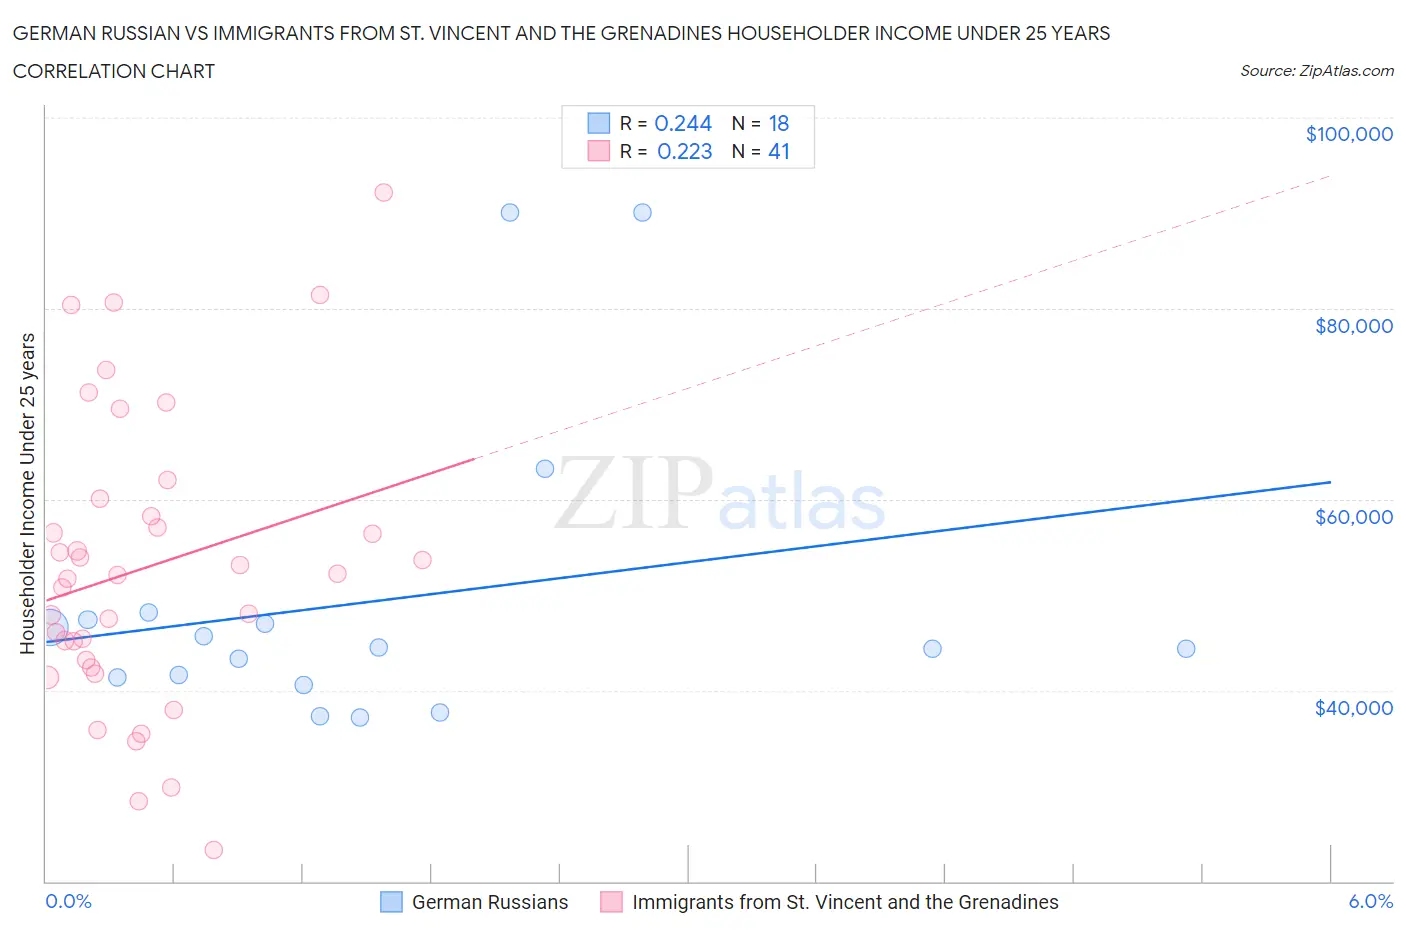 German Russian vs Immigrants from St. Vincent and the Grenadines Householder Income Under 25 years